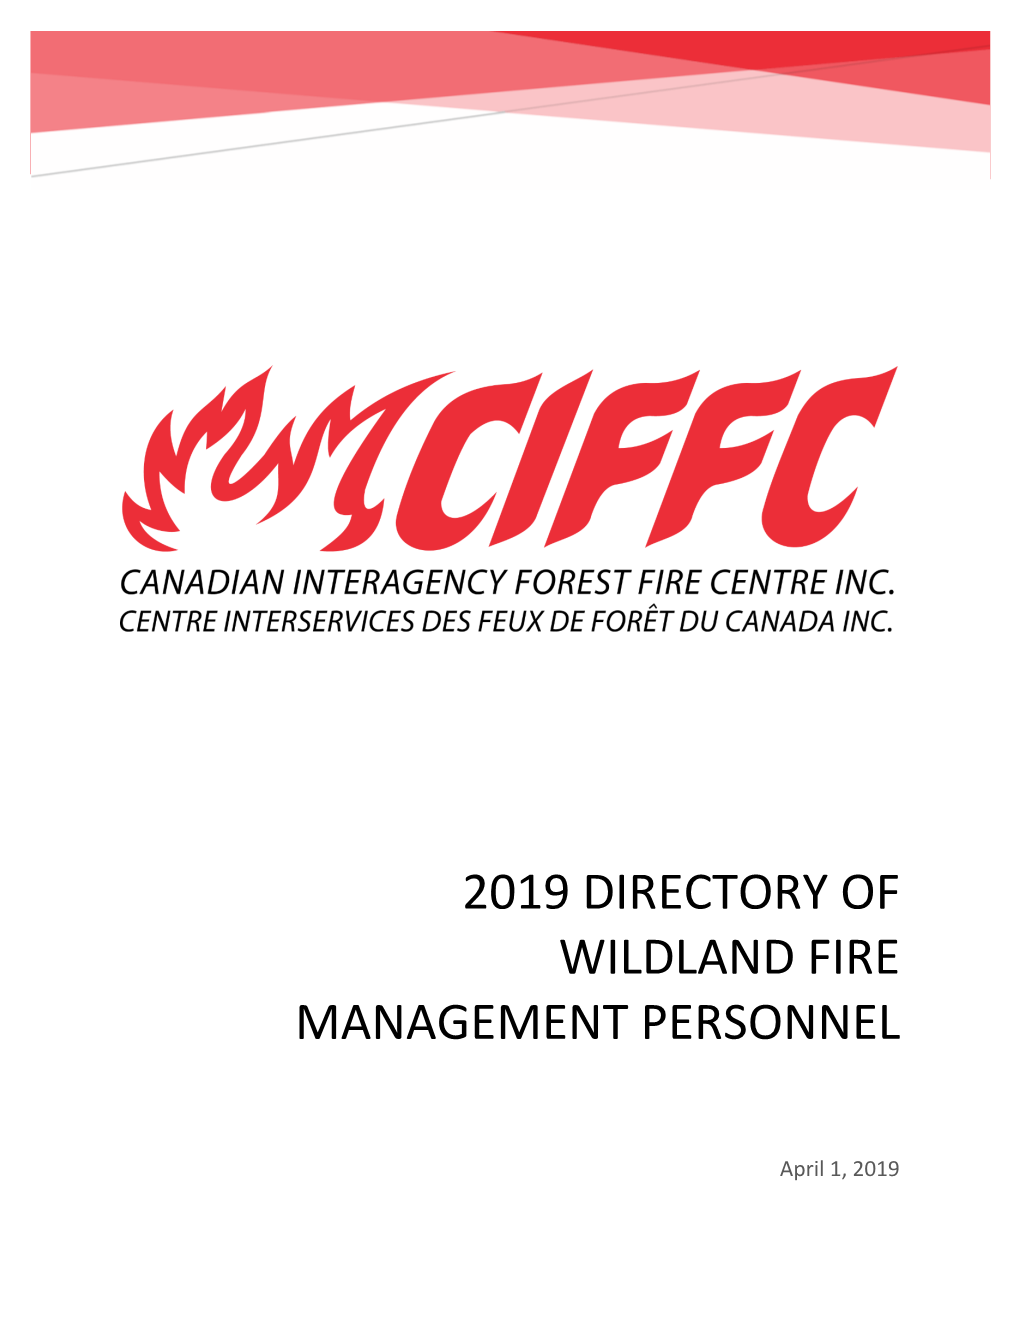 2019 Directory of Wildland Fire Management Personnel